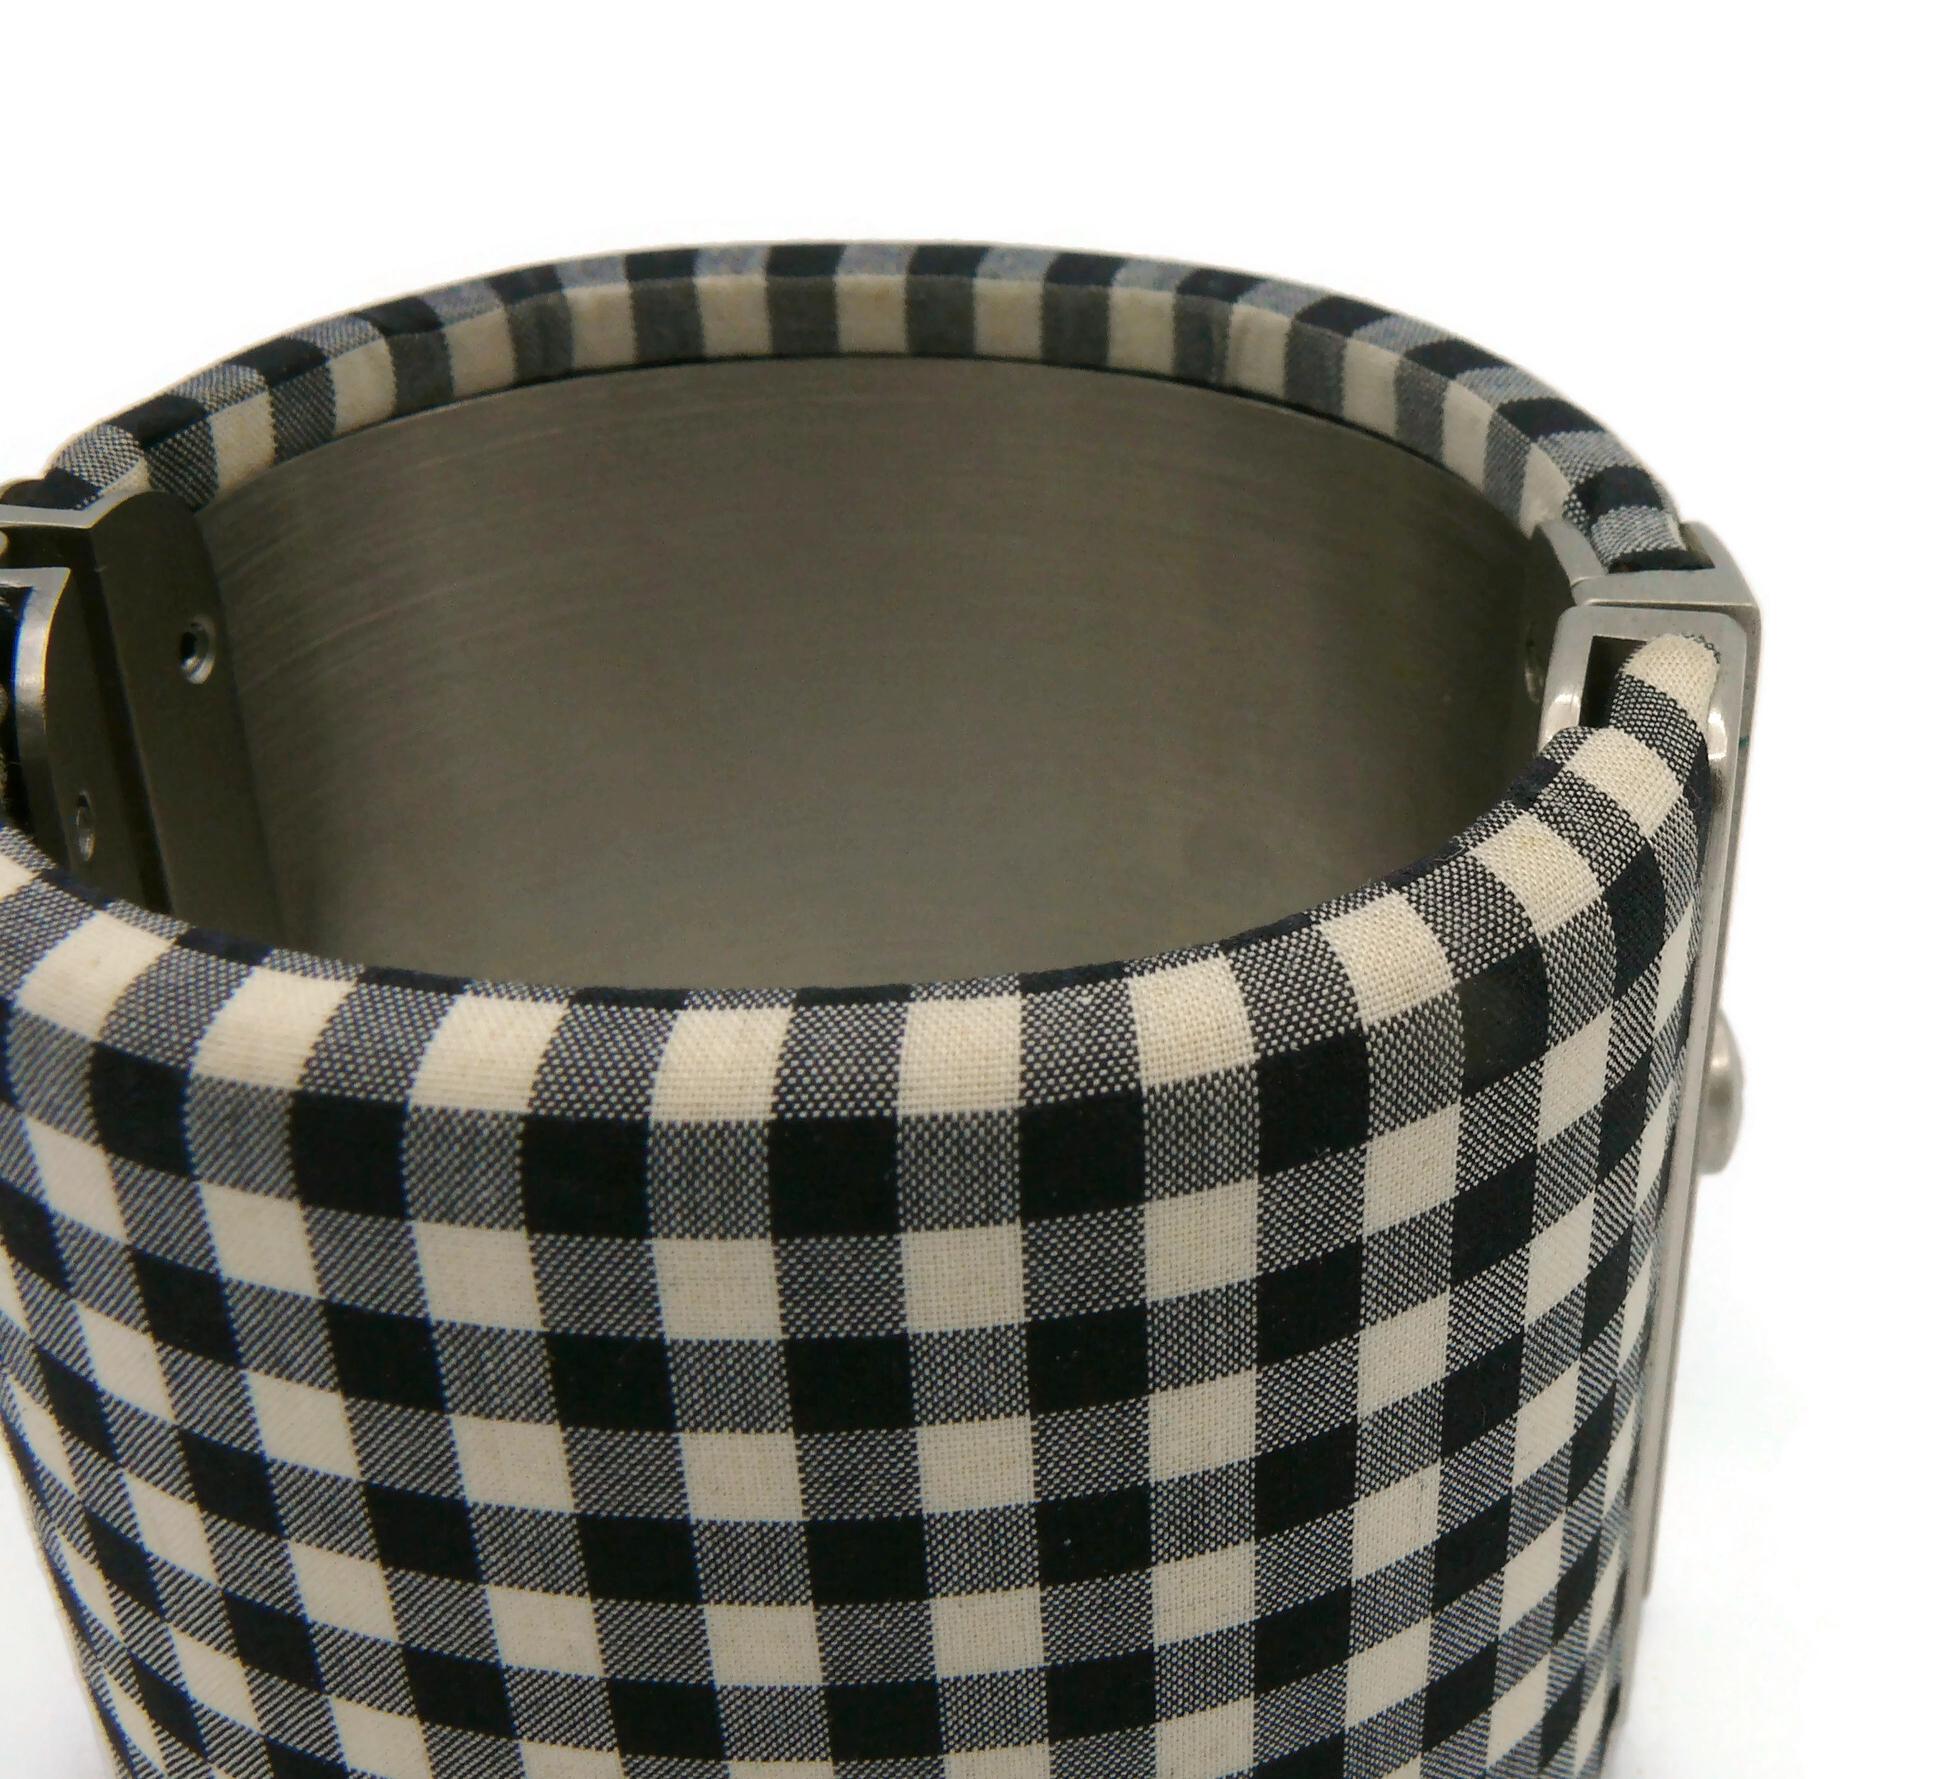 CHANEL Black and White Gingham Vichy Print Cuff Bracelet, Resort Collection 2011 For Sale 6